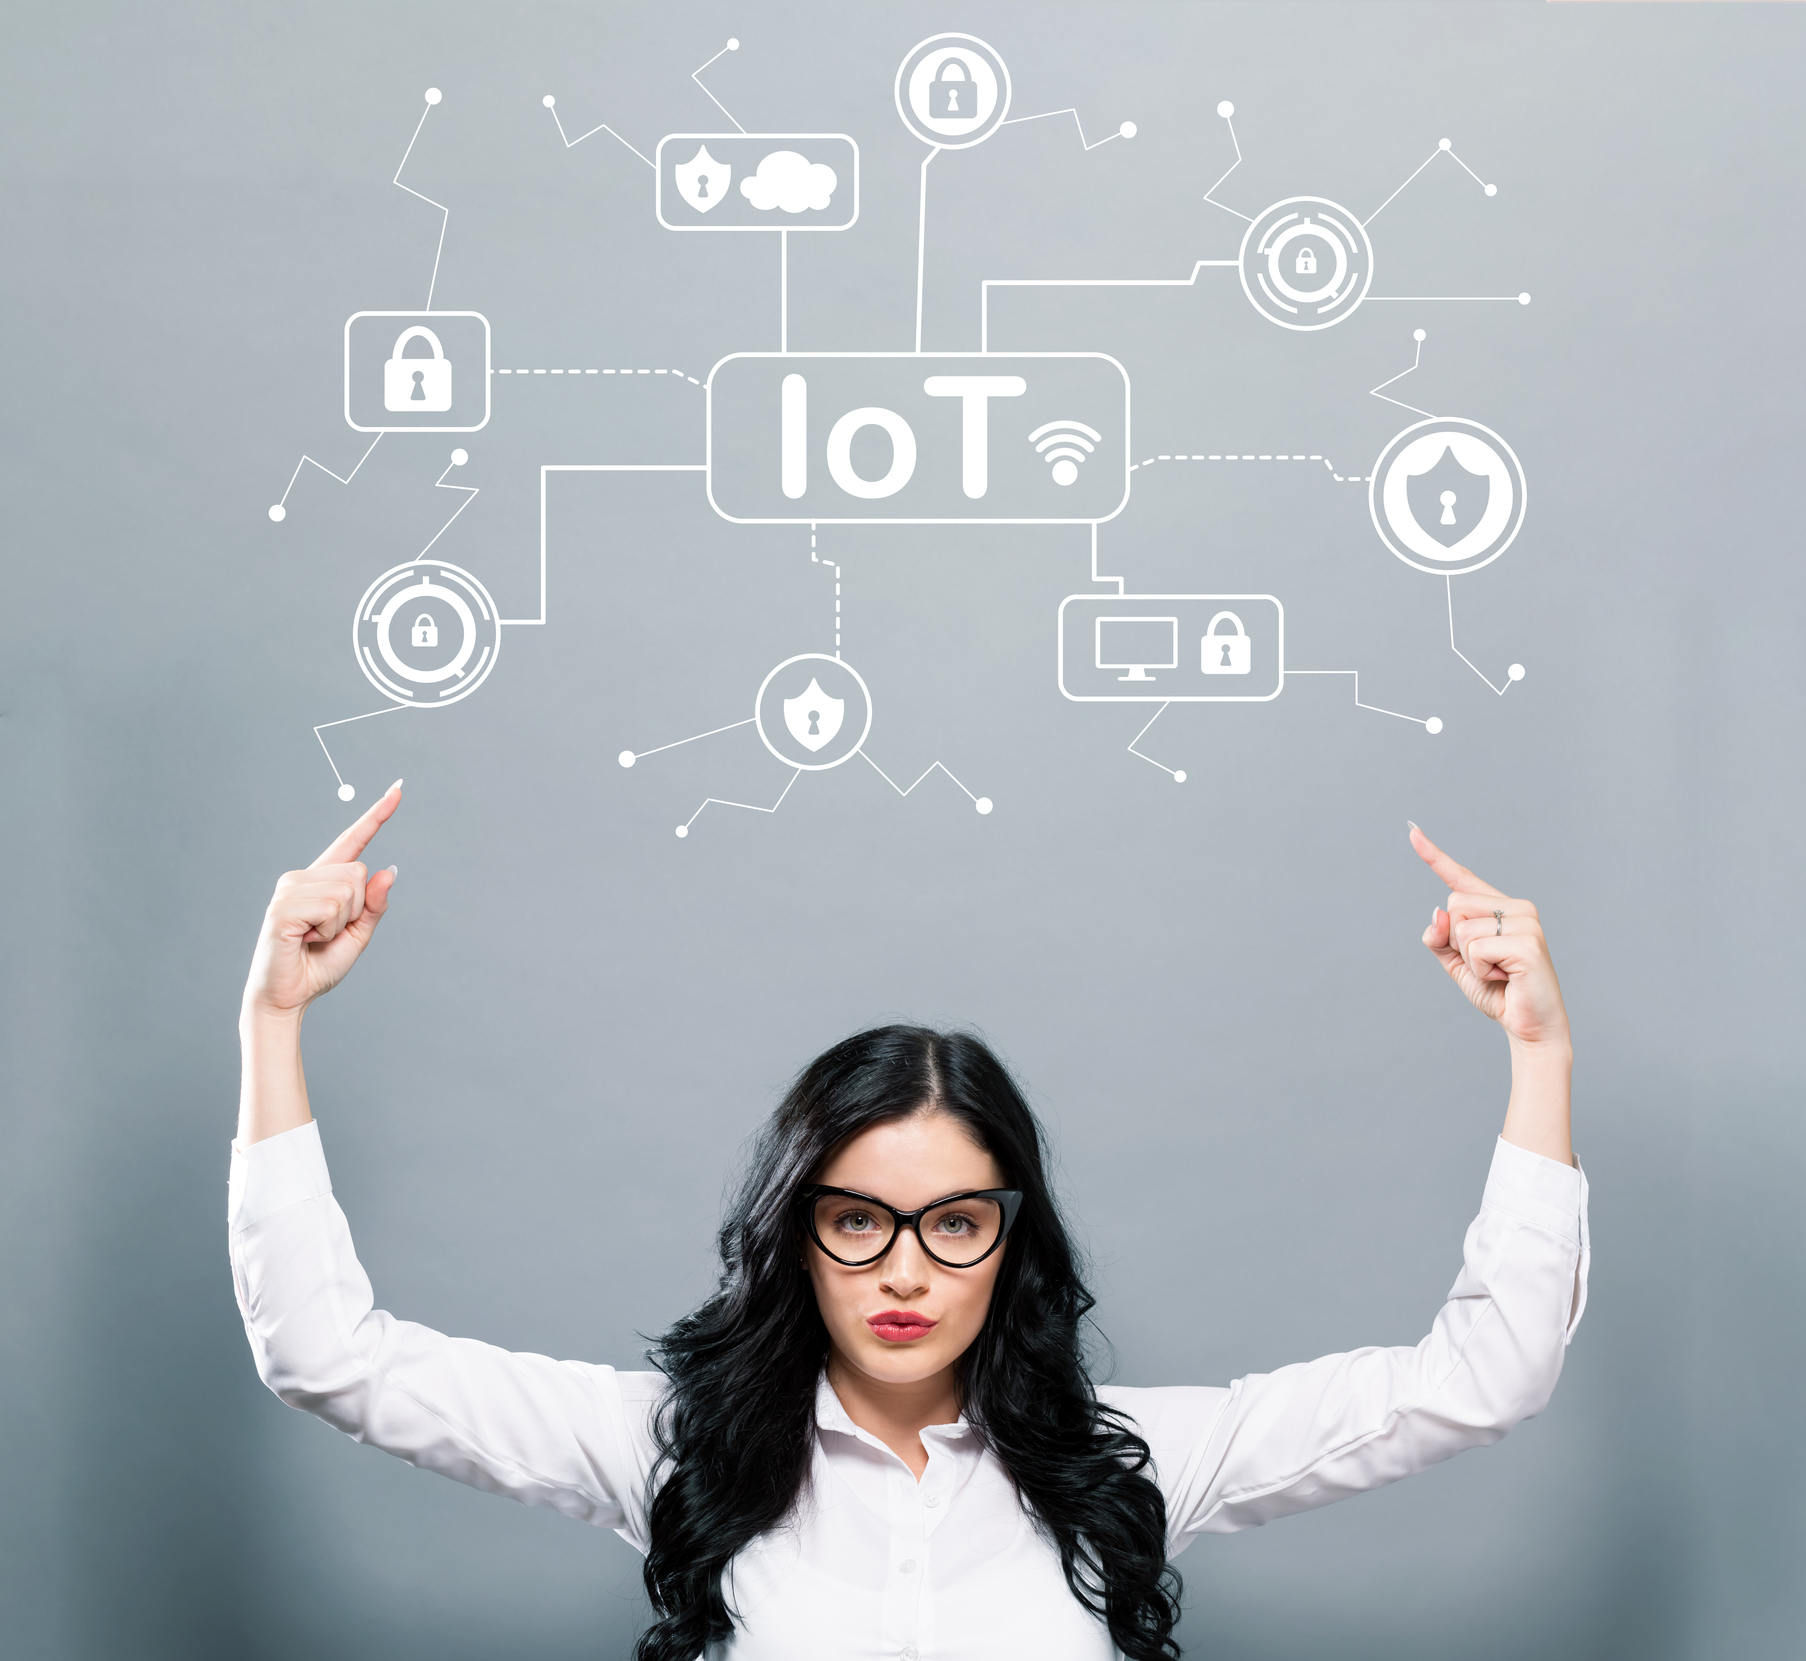 Open-source project focuses on IoT security and trust